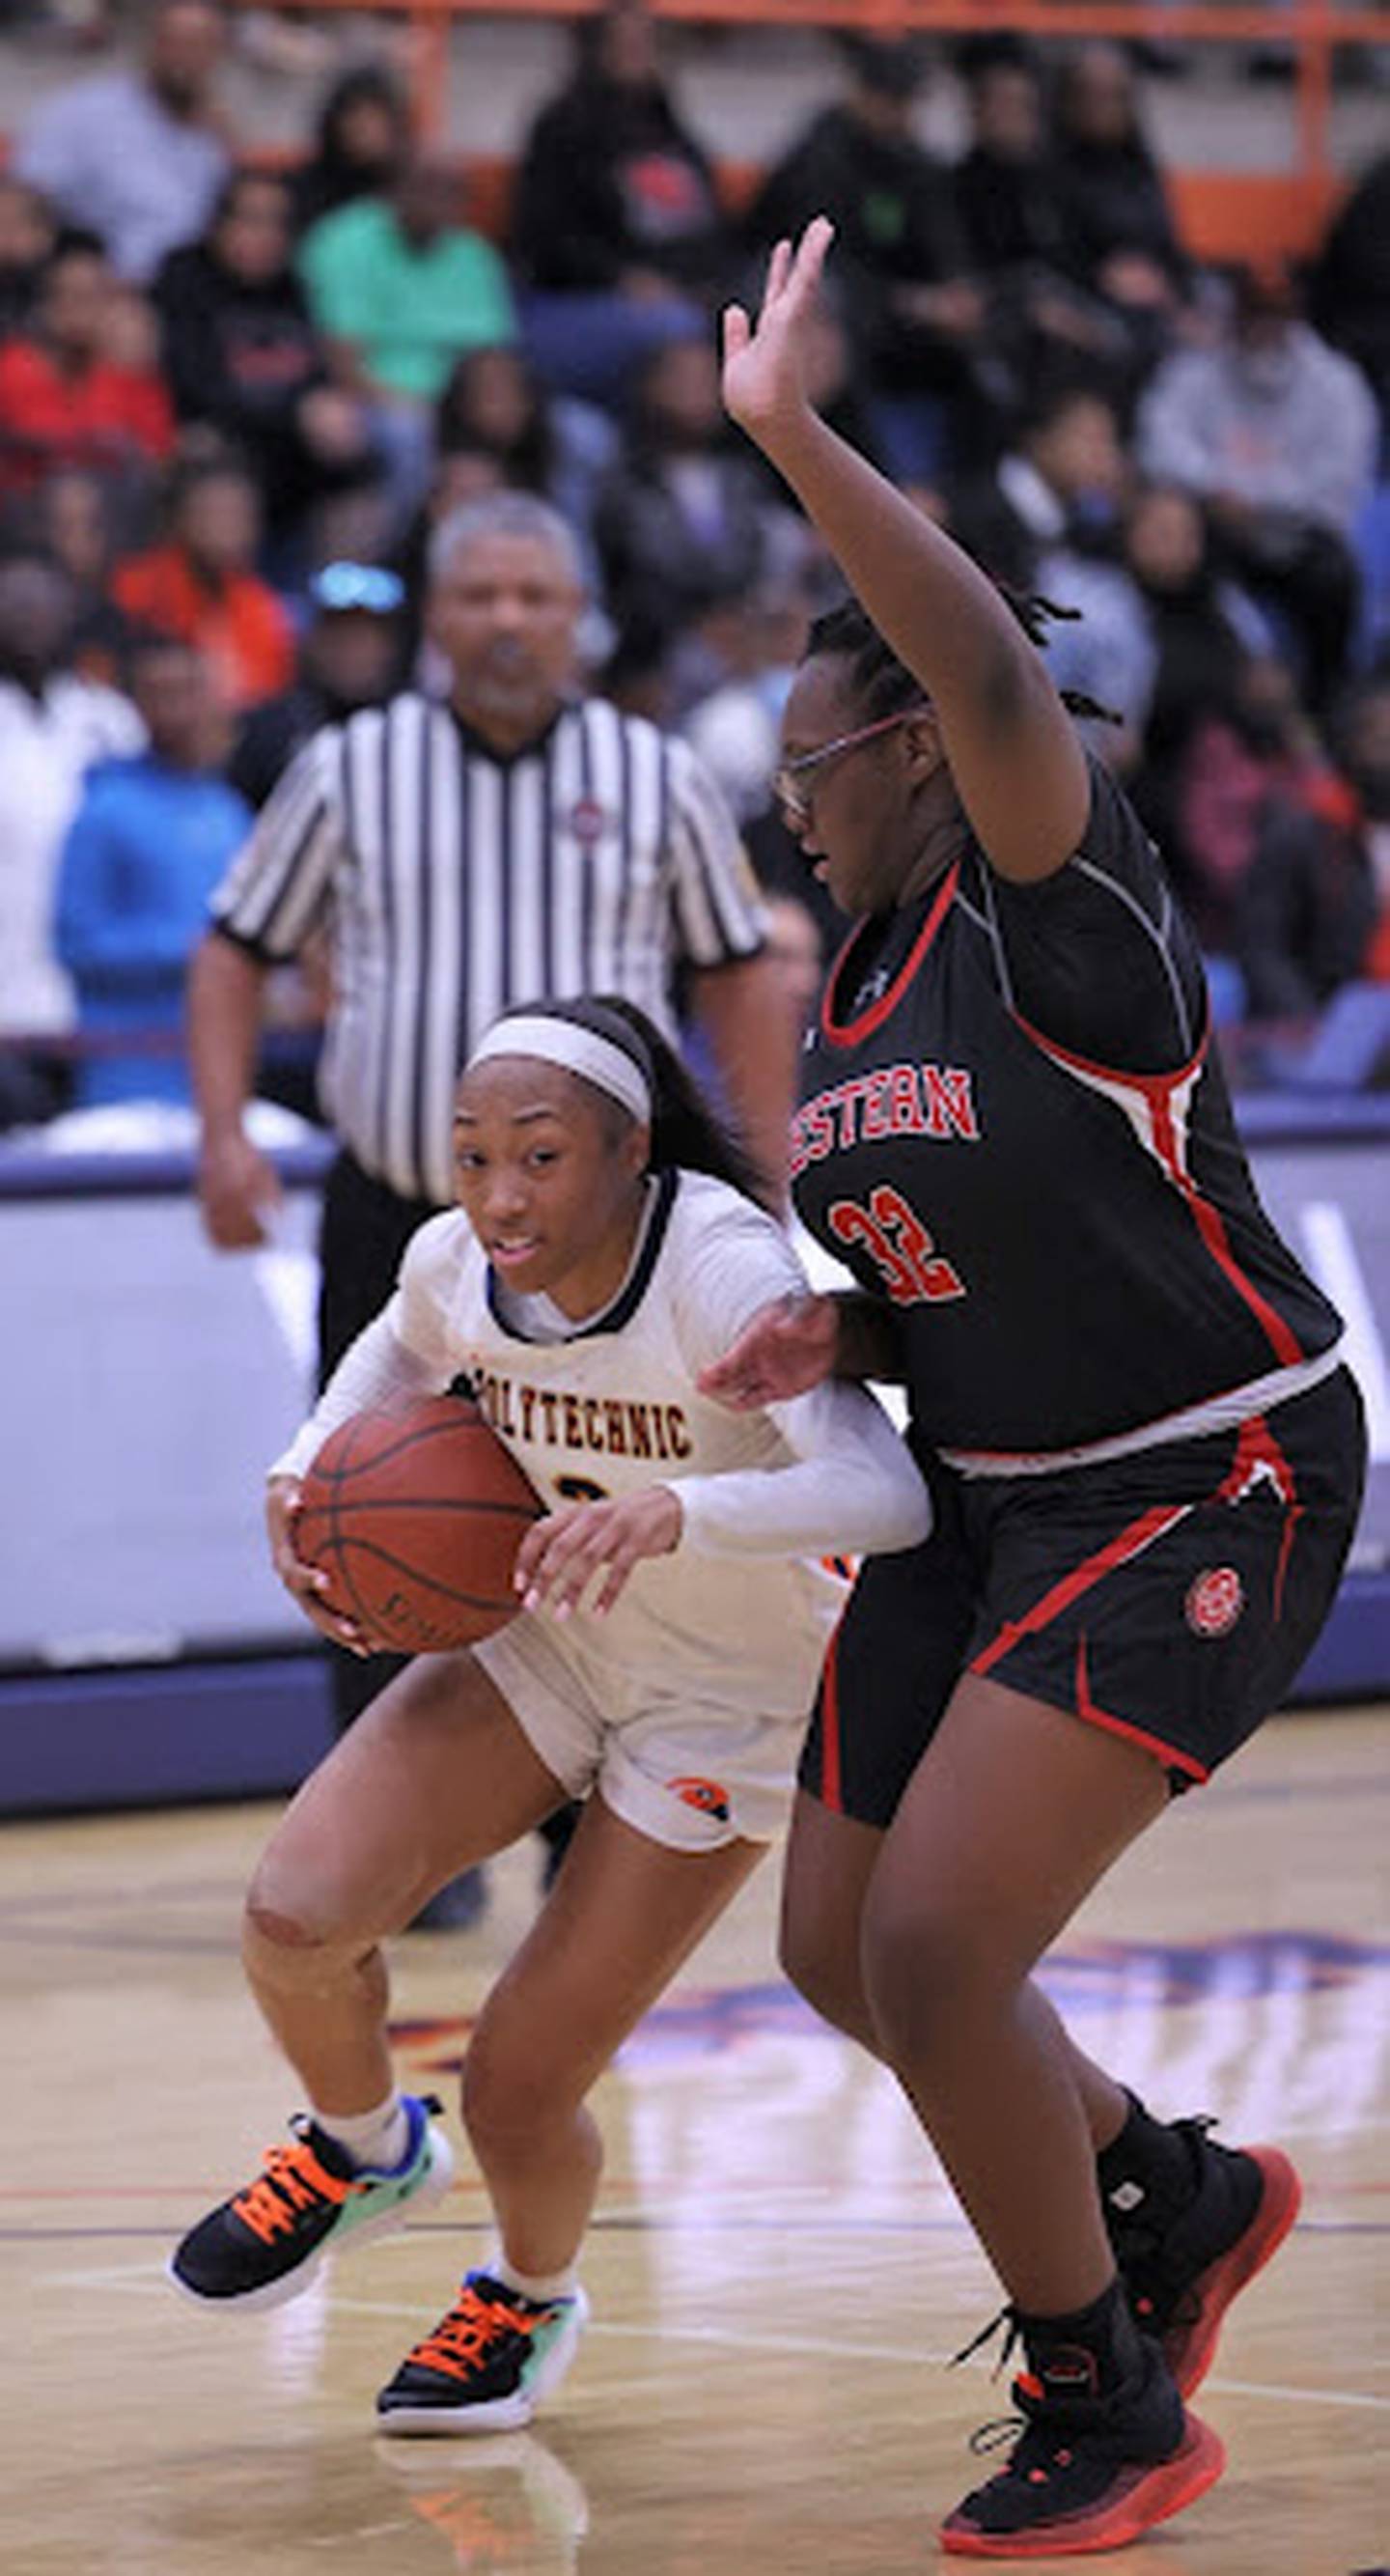 Poly's Da'Brya Clark (left) is defended by Western's Breasia Coit during Tuesday's Baltimore City girls basketball championship game. Clark finished with 19 points including four free throws in the final 30 seconds as the No. 3 Engineers dethroned the 13th-ranked Doves as champs with a 52-44 victory at Morgan State University.